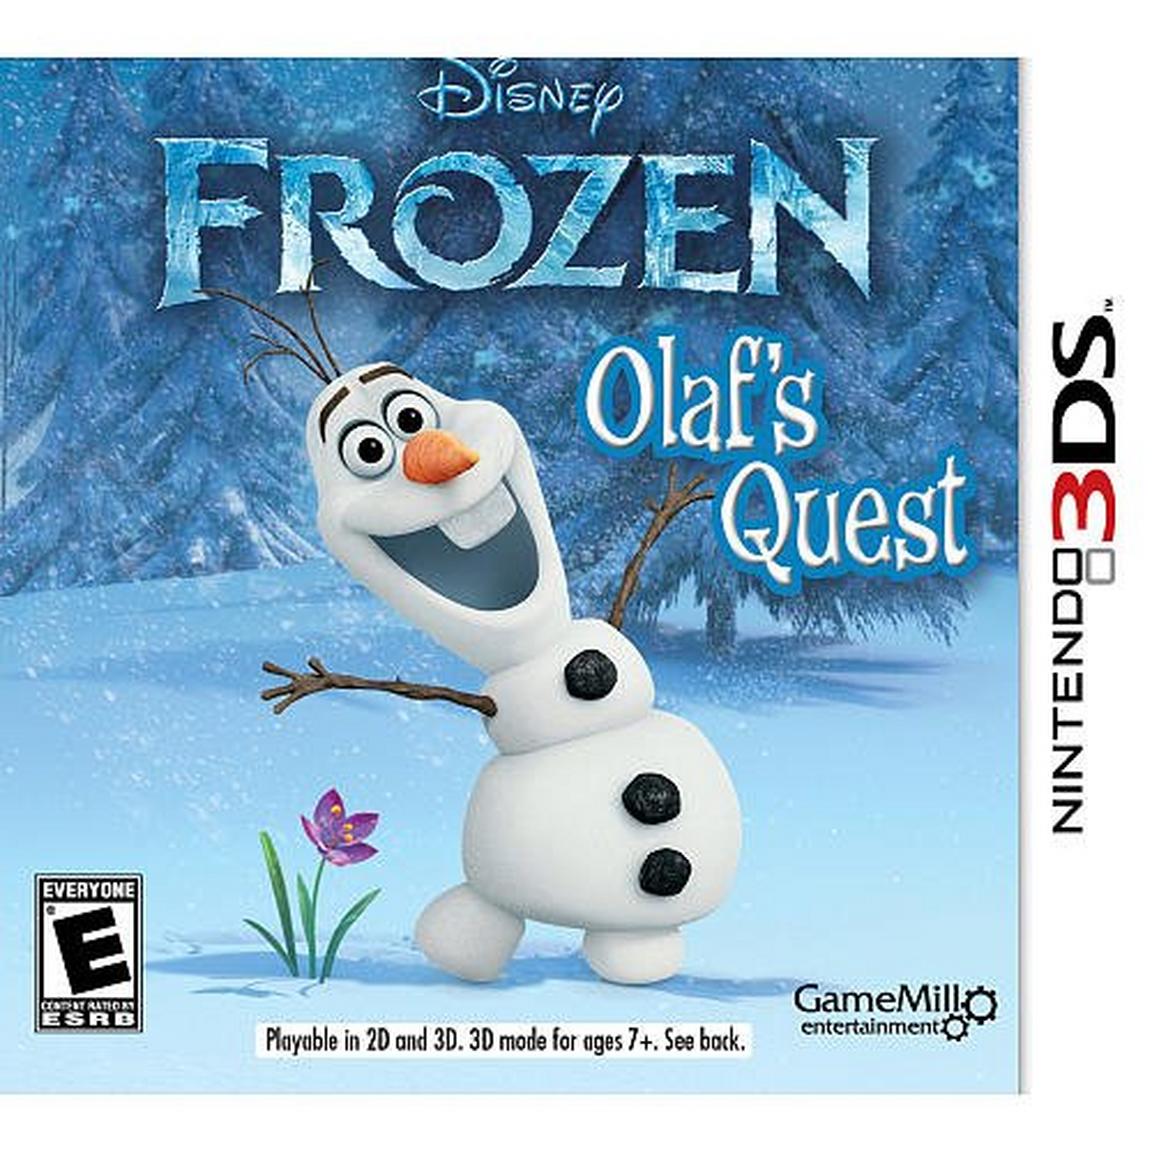 Frozen: Olaf's Quest - Nintendo 3DS, Pre-Owned